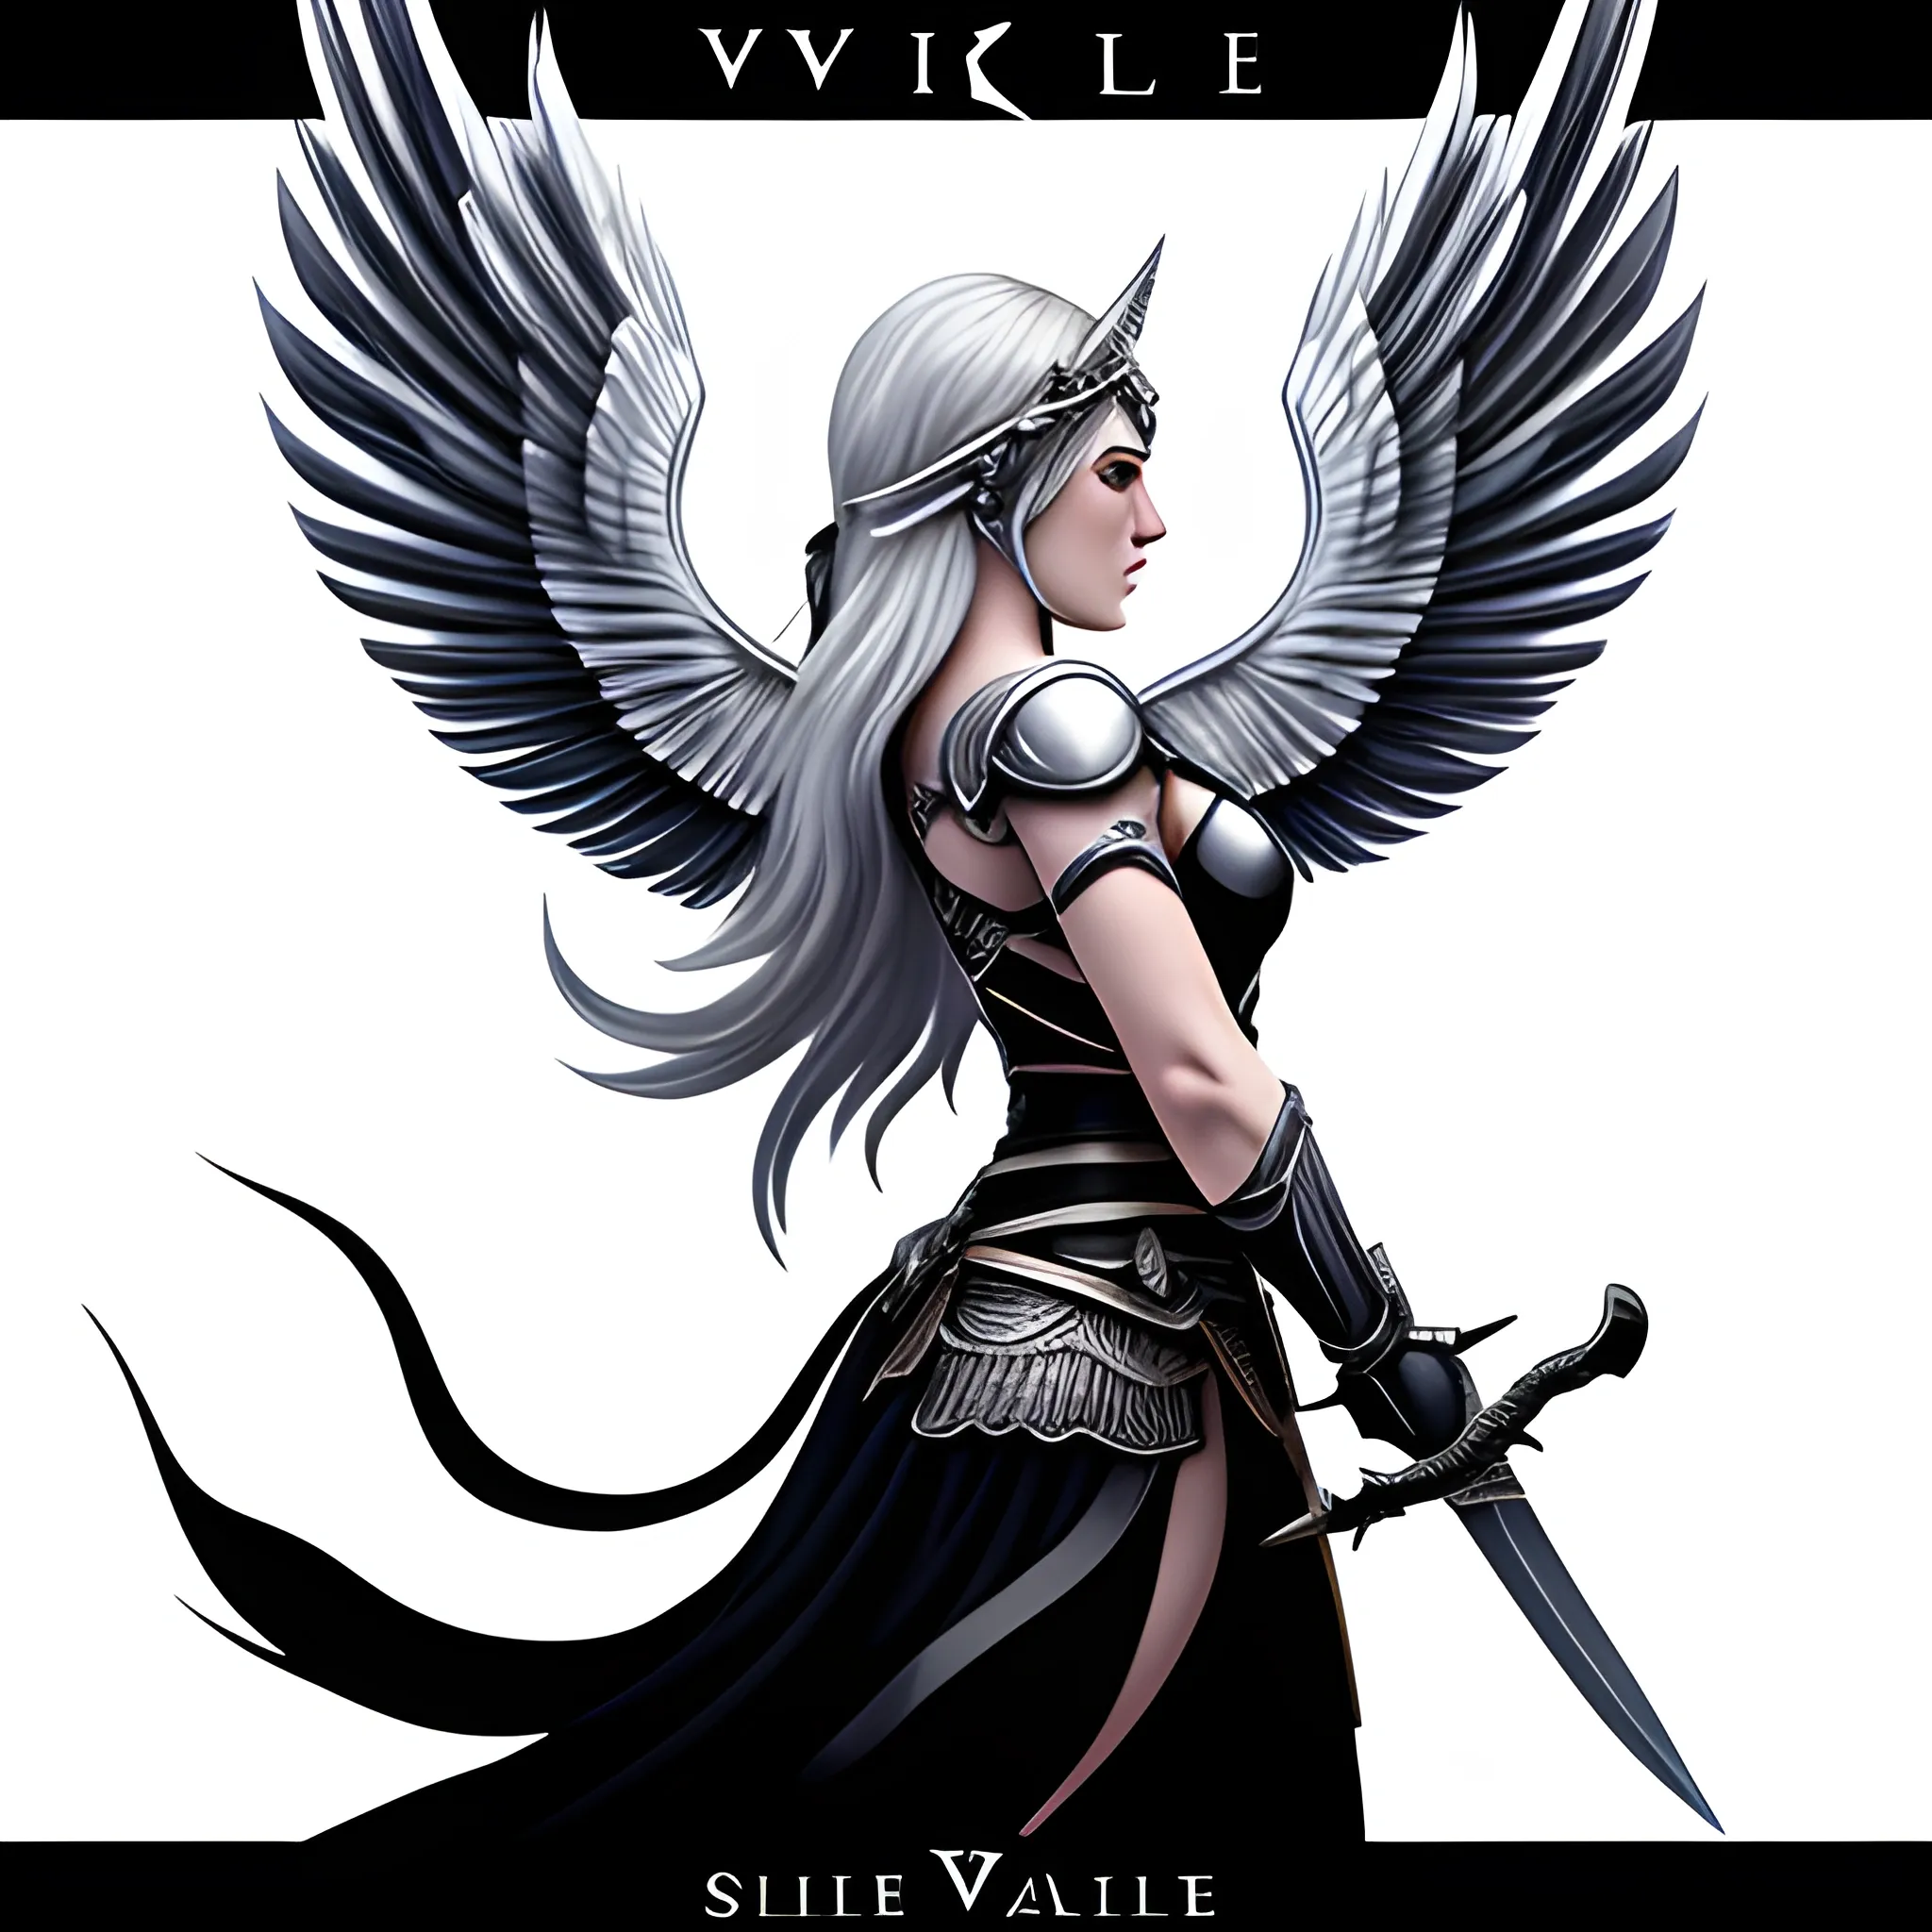 White Valkyrie logo, side view woman, with sword, with wings, Black background